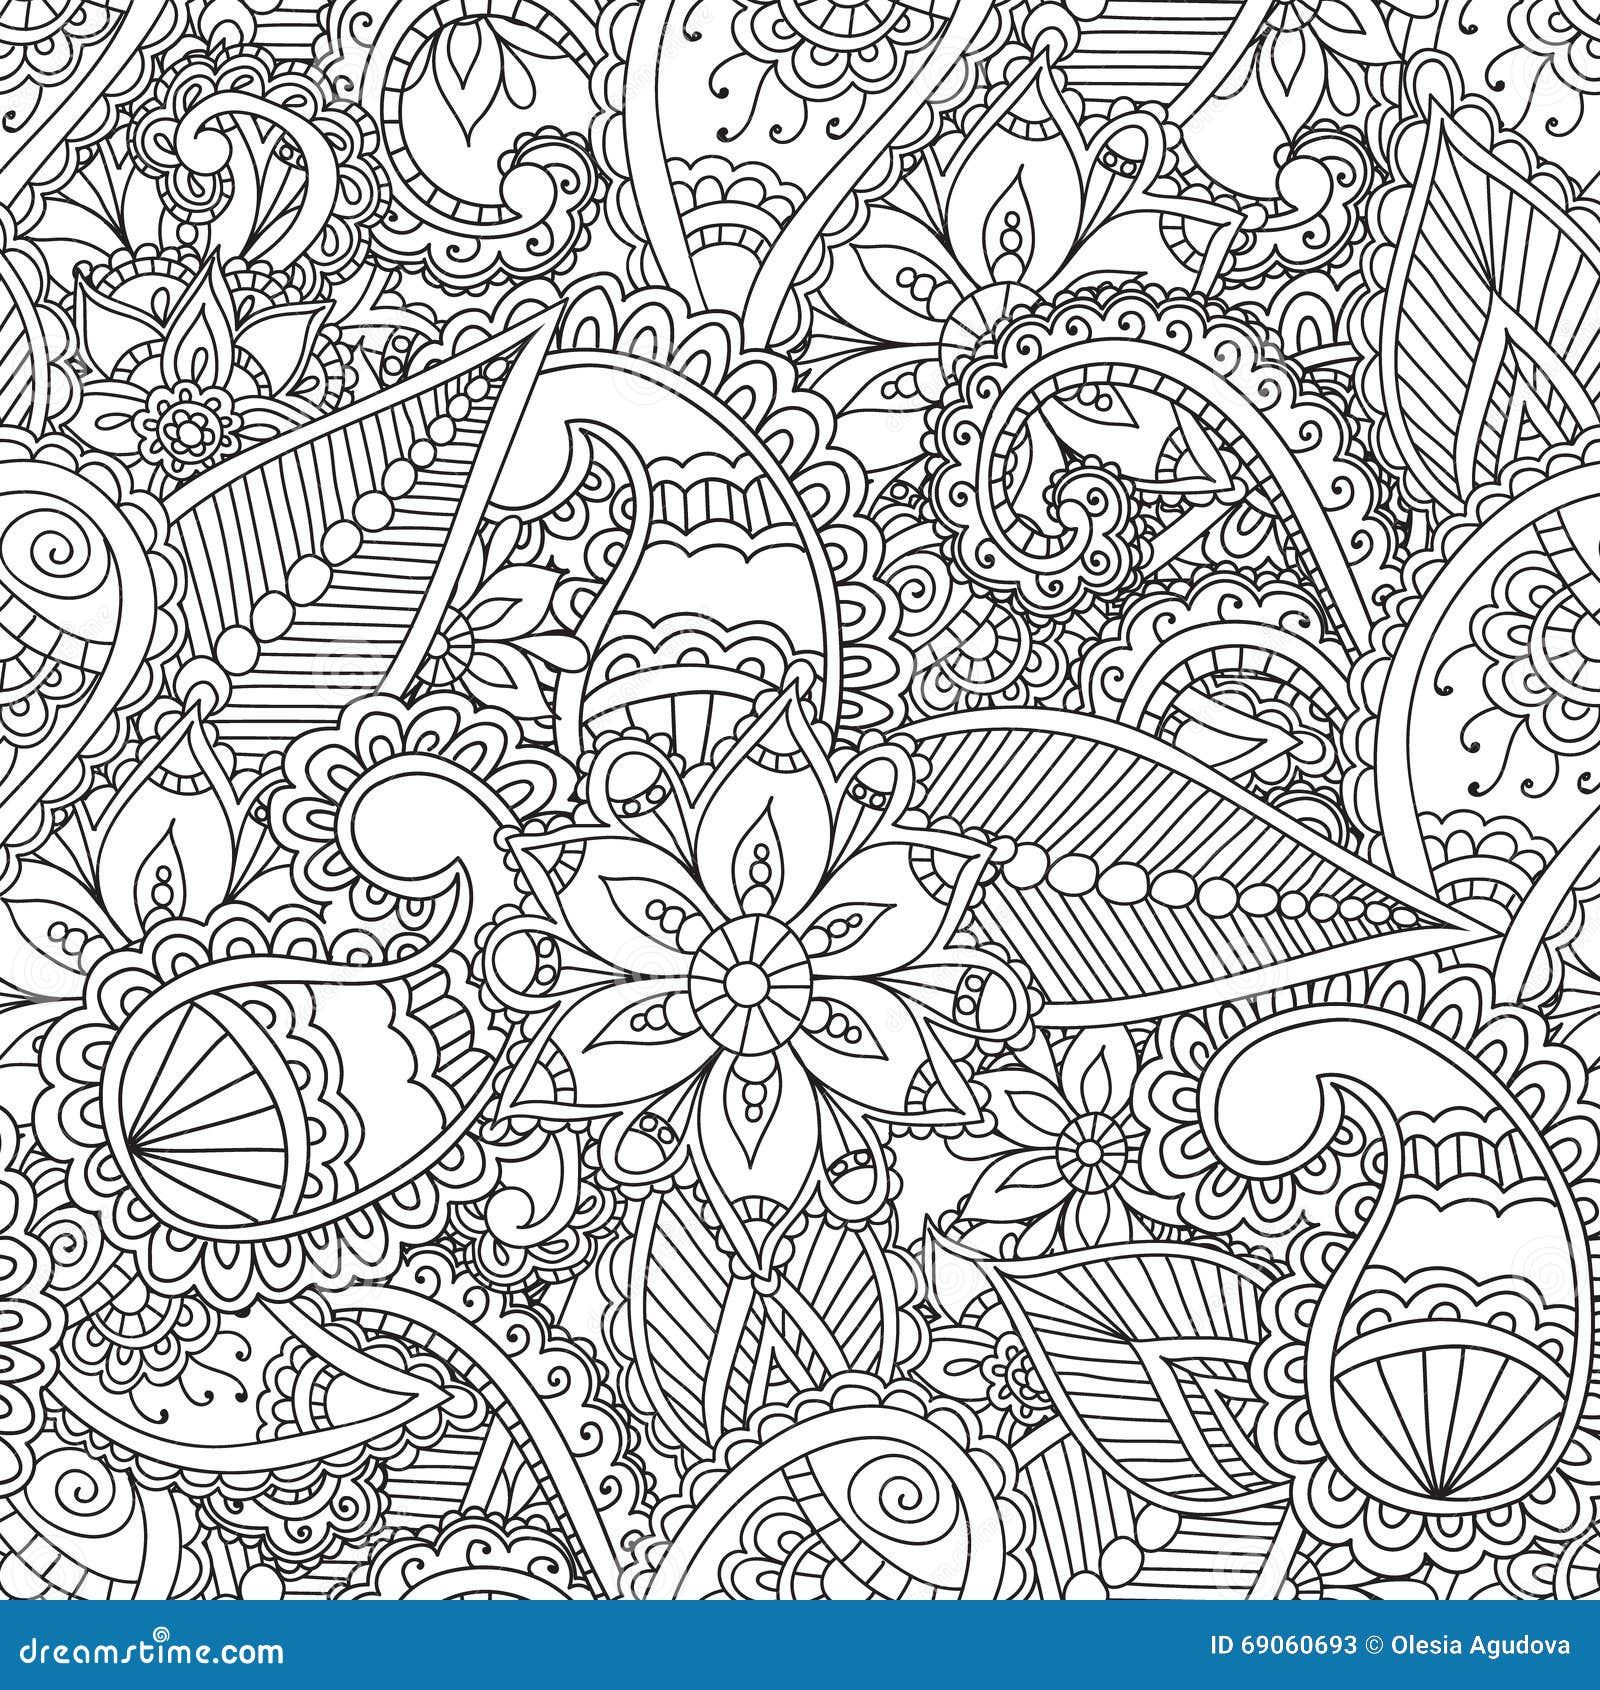 Coloring pages for adults